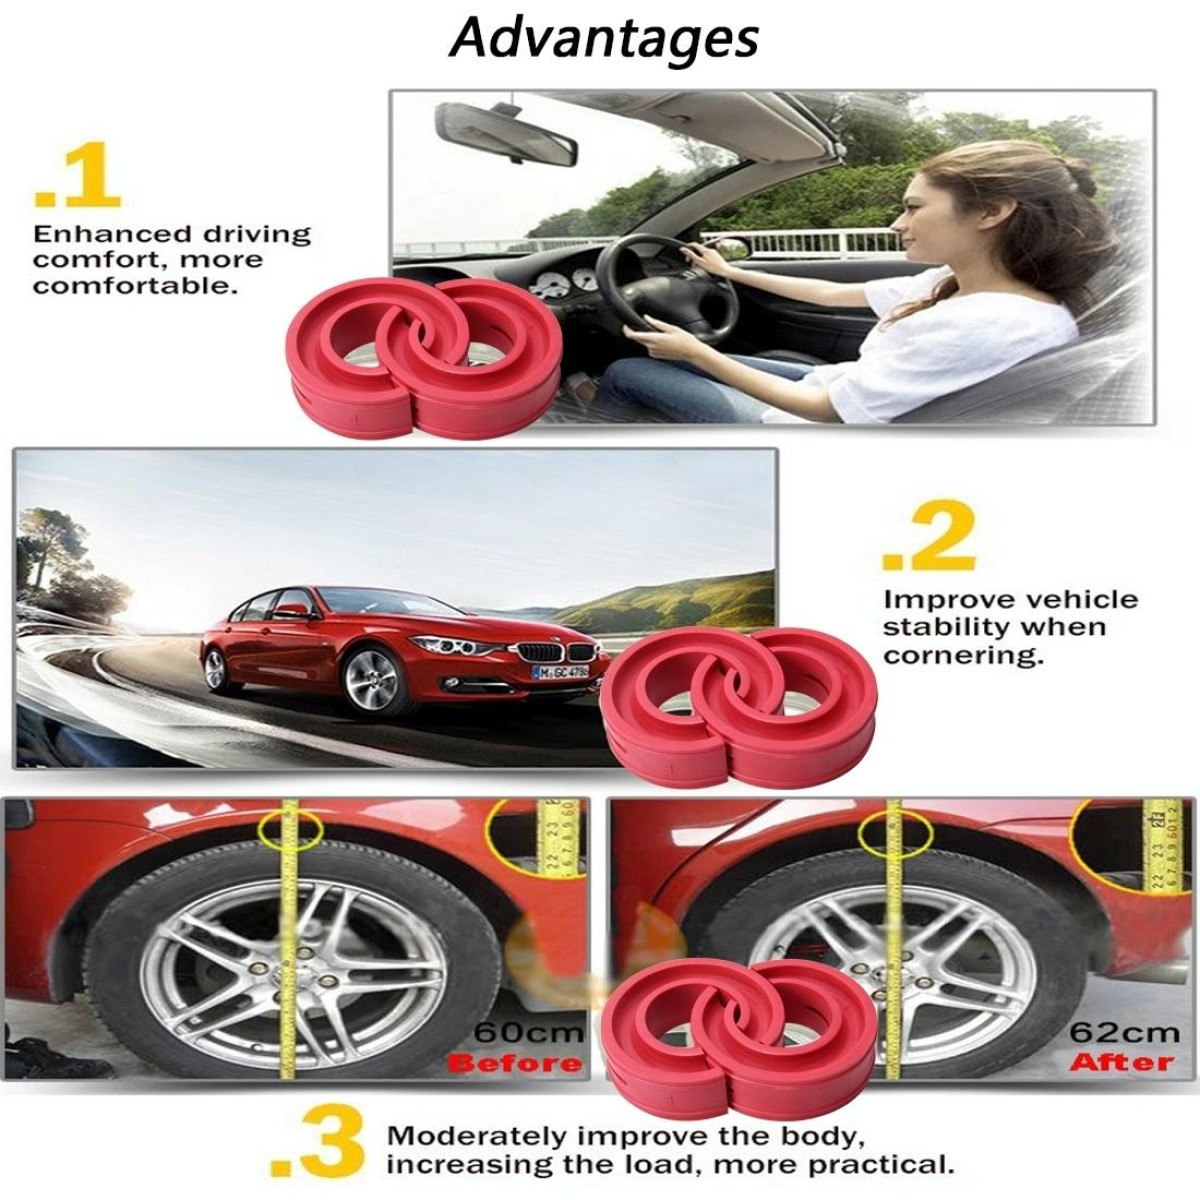 2 PCS Car Auto C Type Shock Absorber Spring Bumper Power Cushion Buffer, Spring Spacing: 27mm, Colloid Height: 50mm(Red)